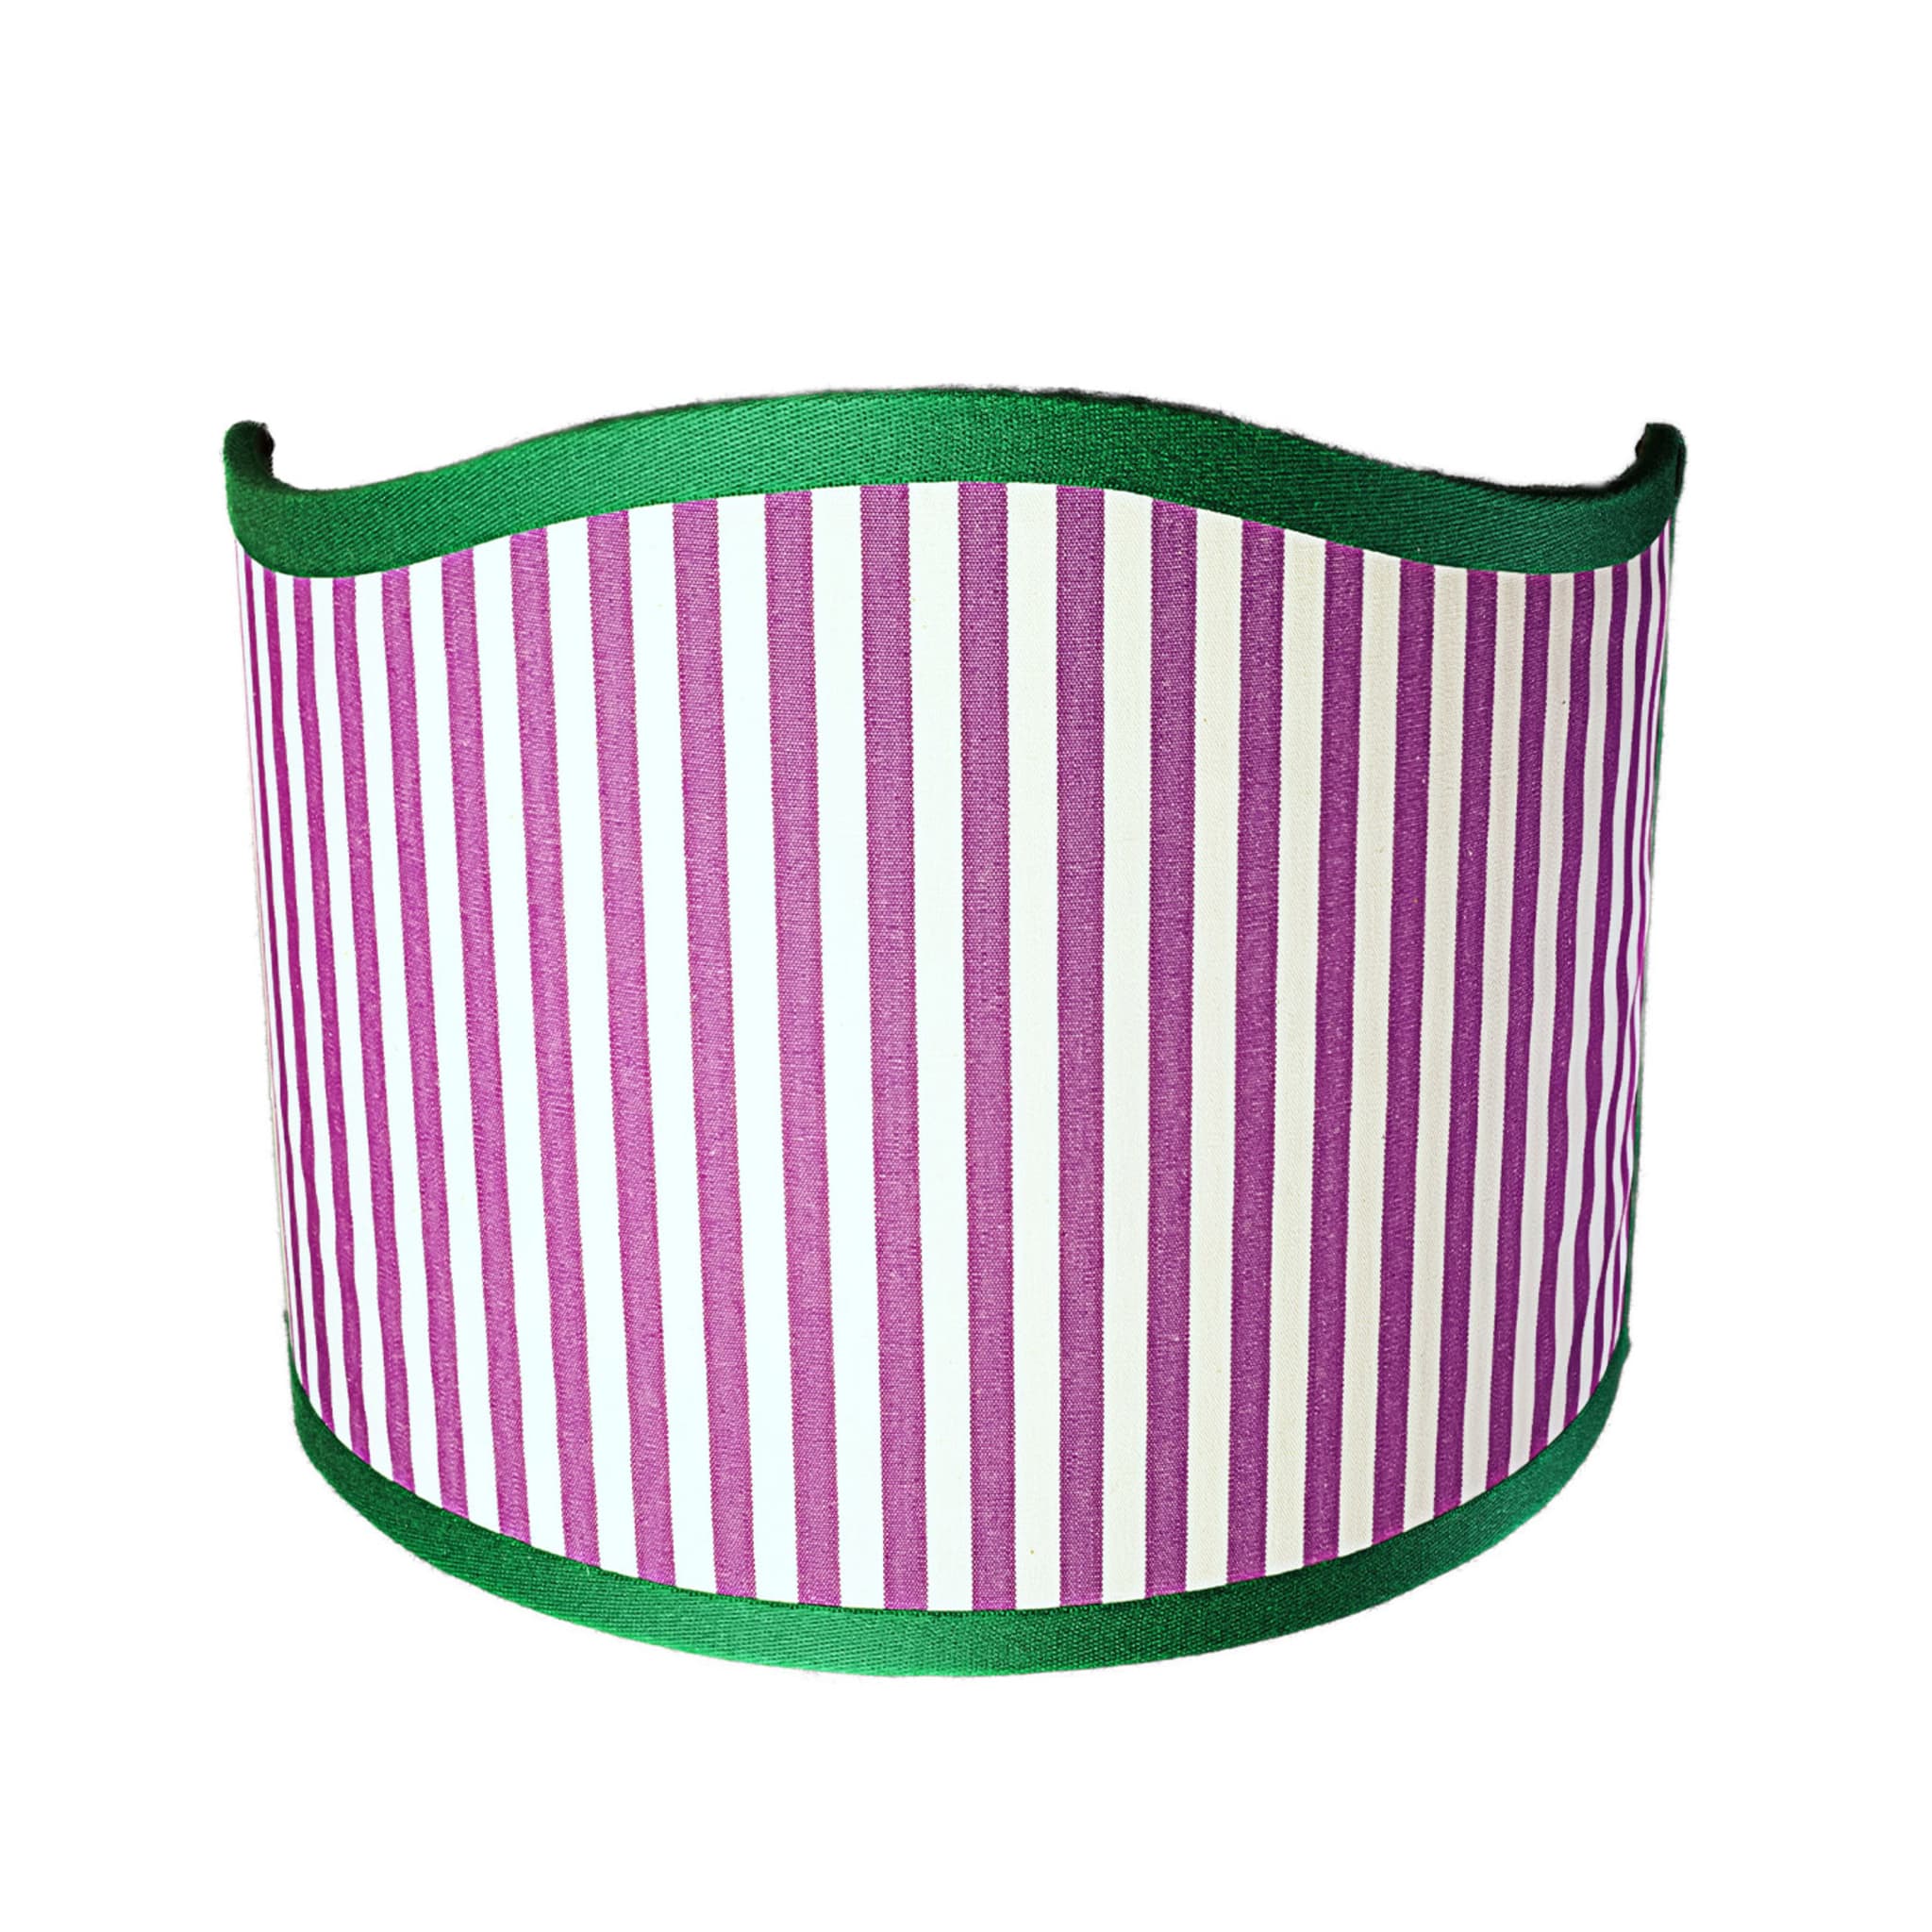 Stripes Green and Purple Wall Lamp - Alternative view 4